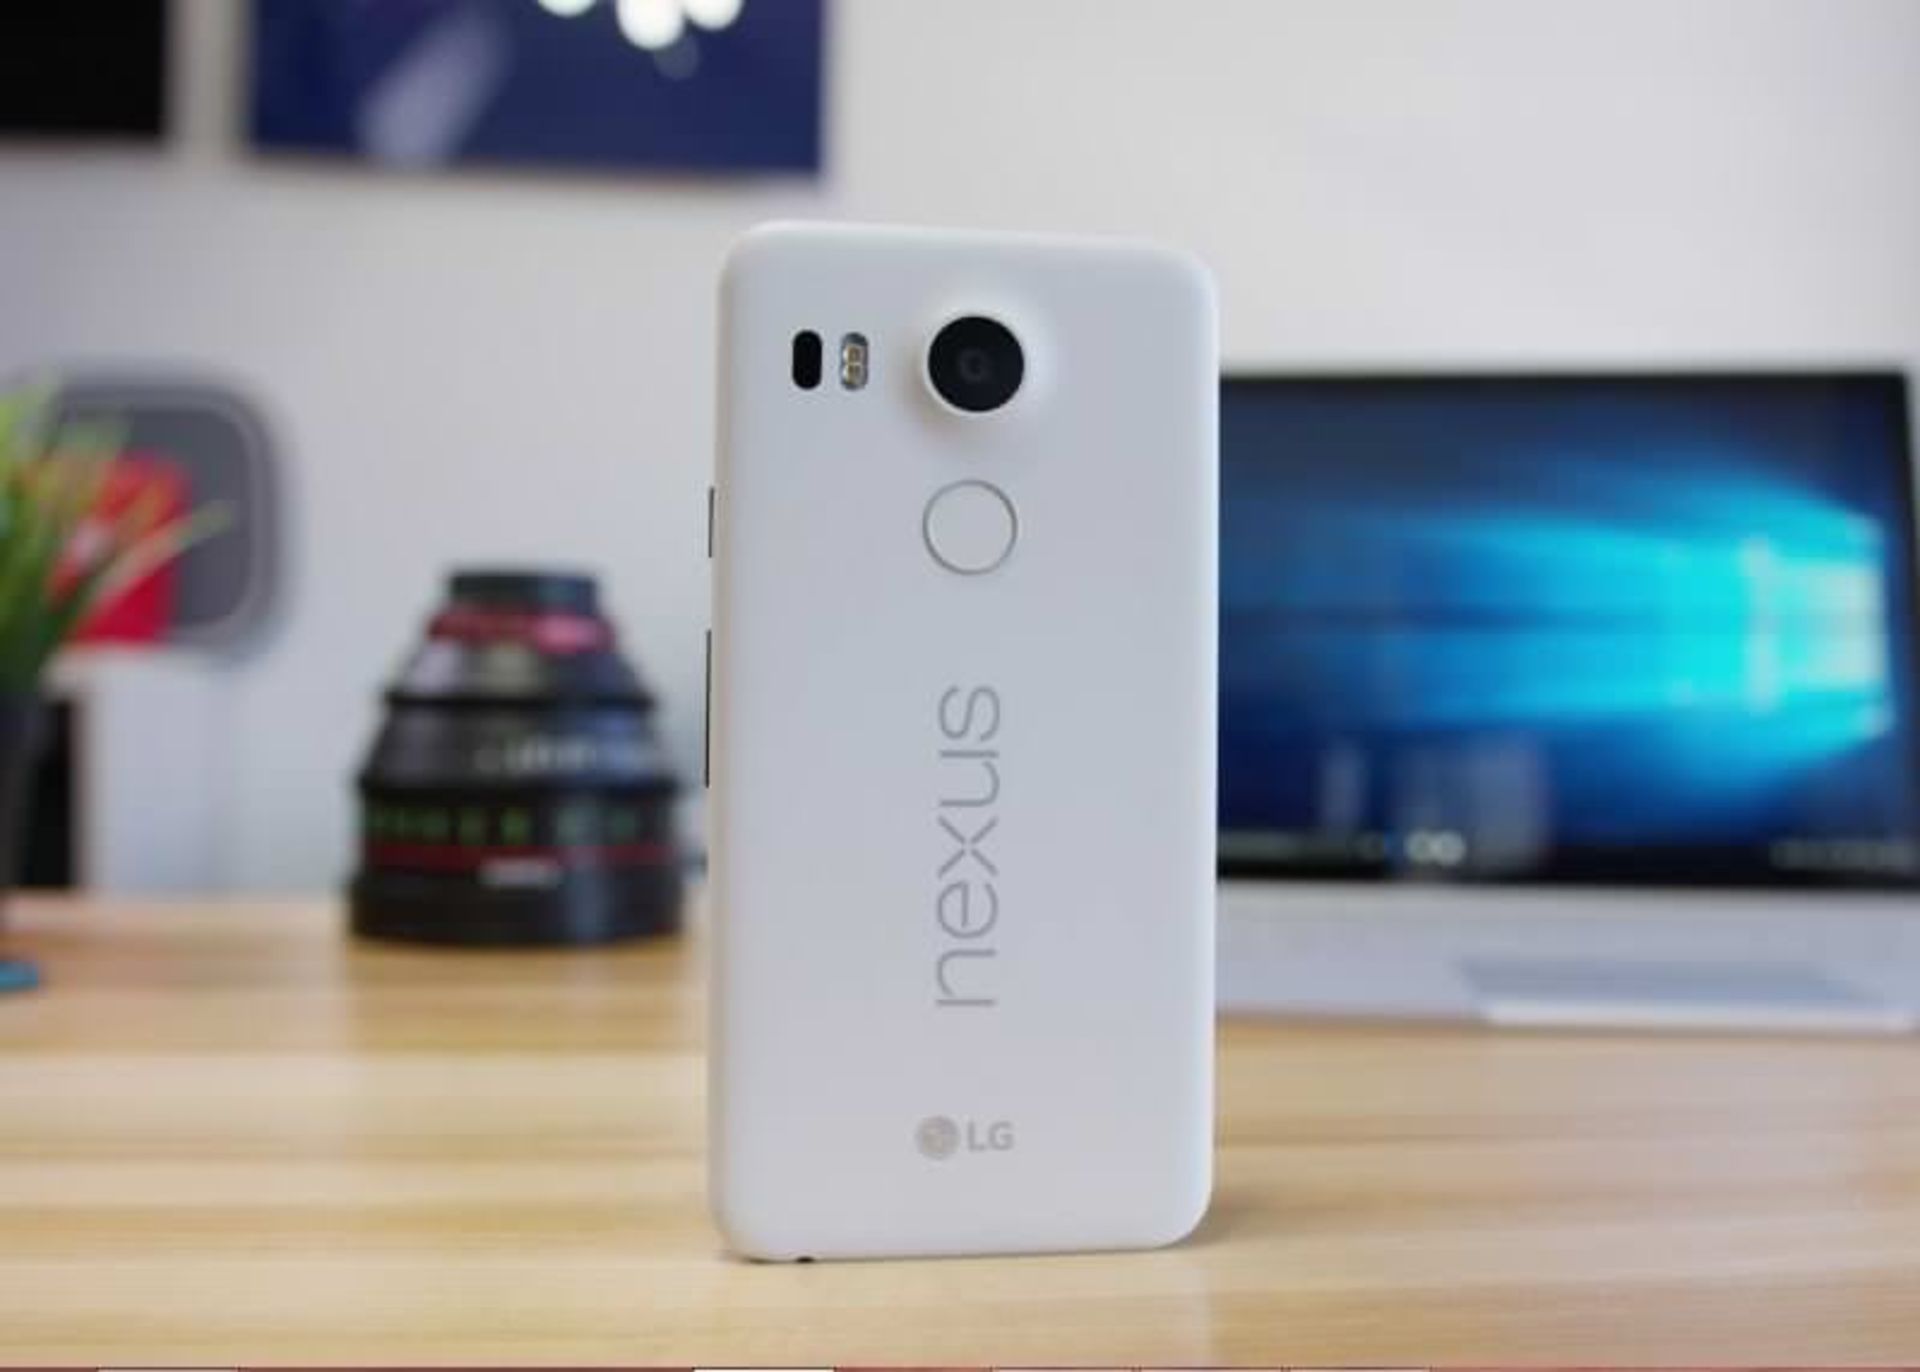 google-will-ditch-the-nexus-name-and-go-with-something-different